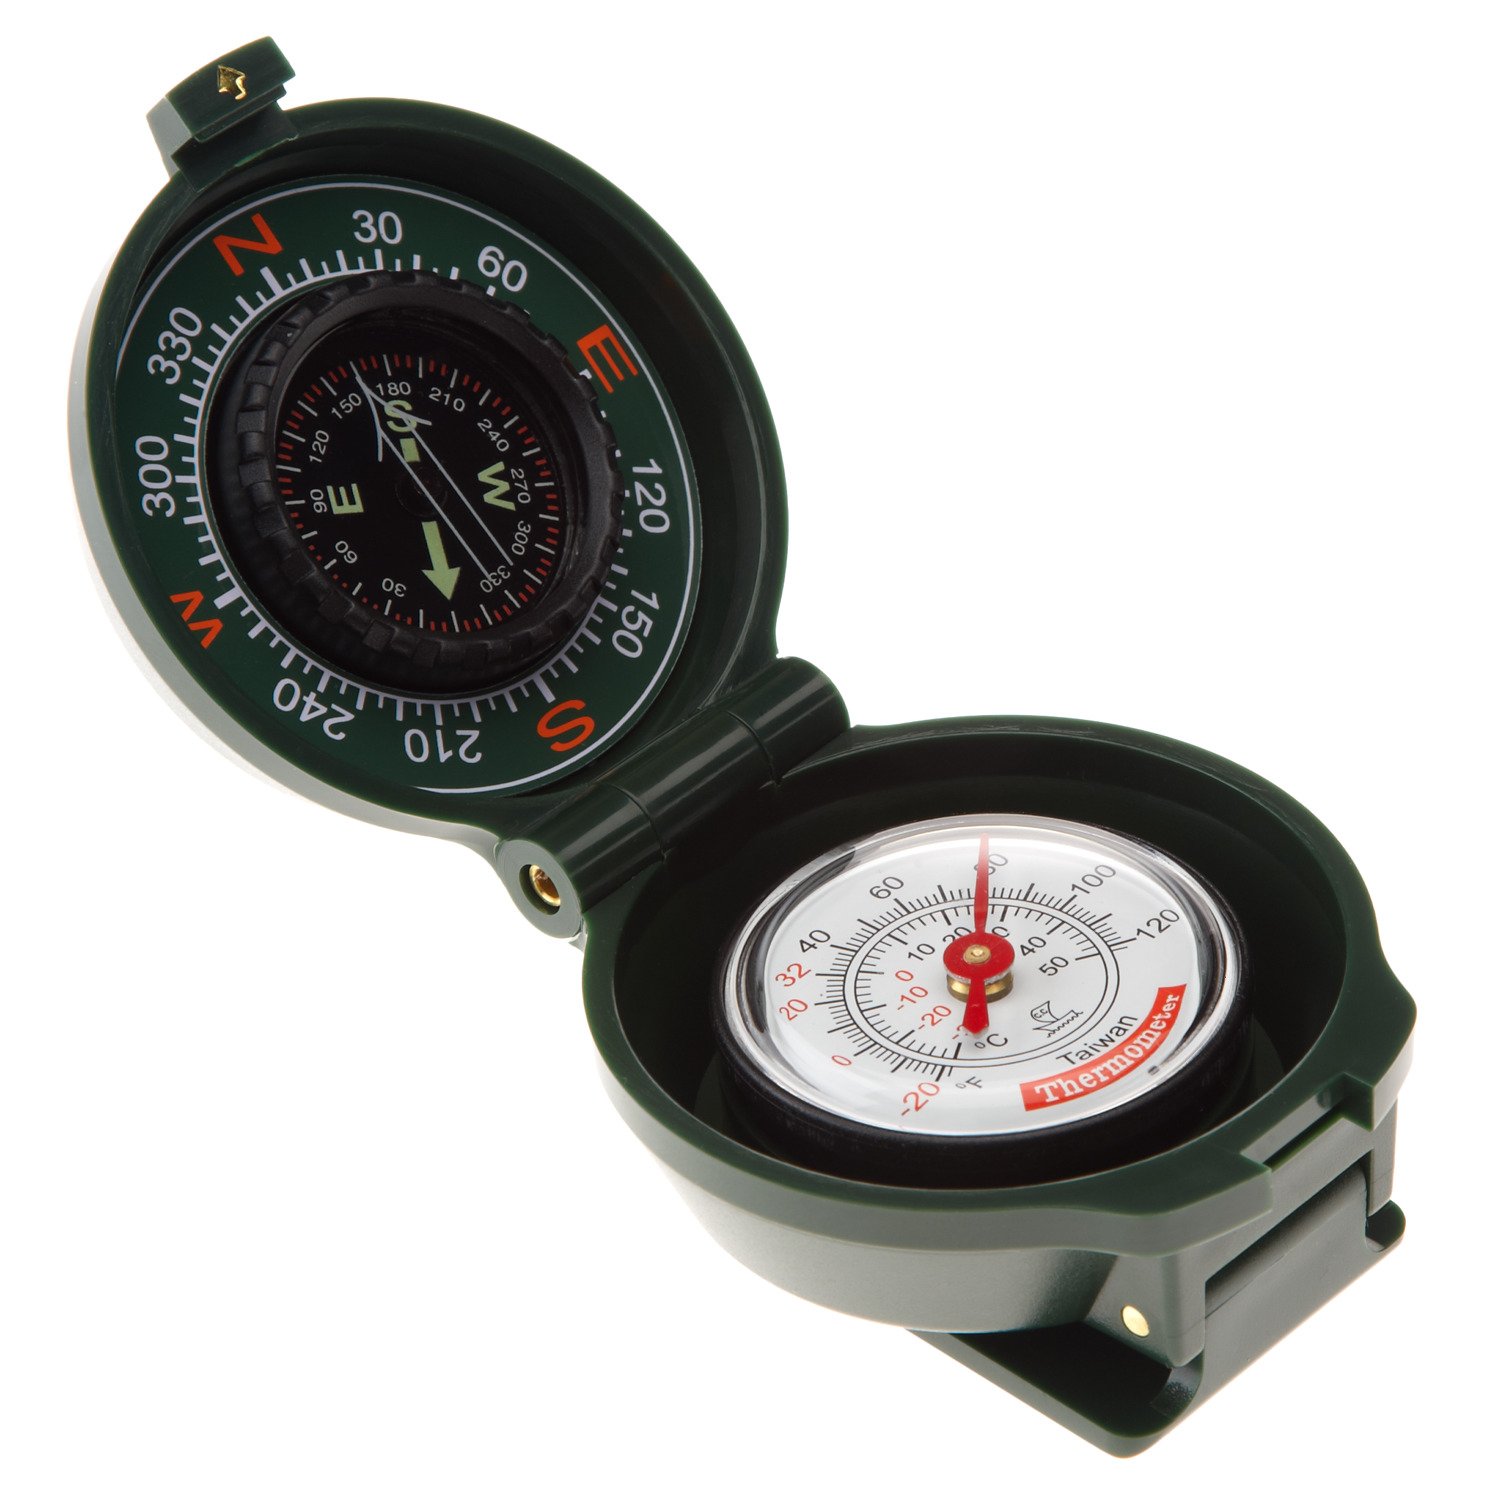 Thermometer/Compass Clip